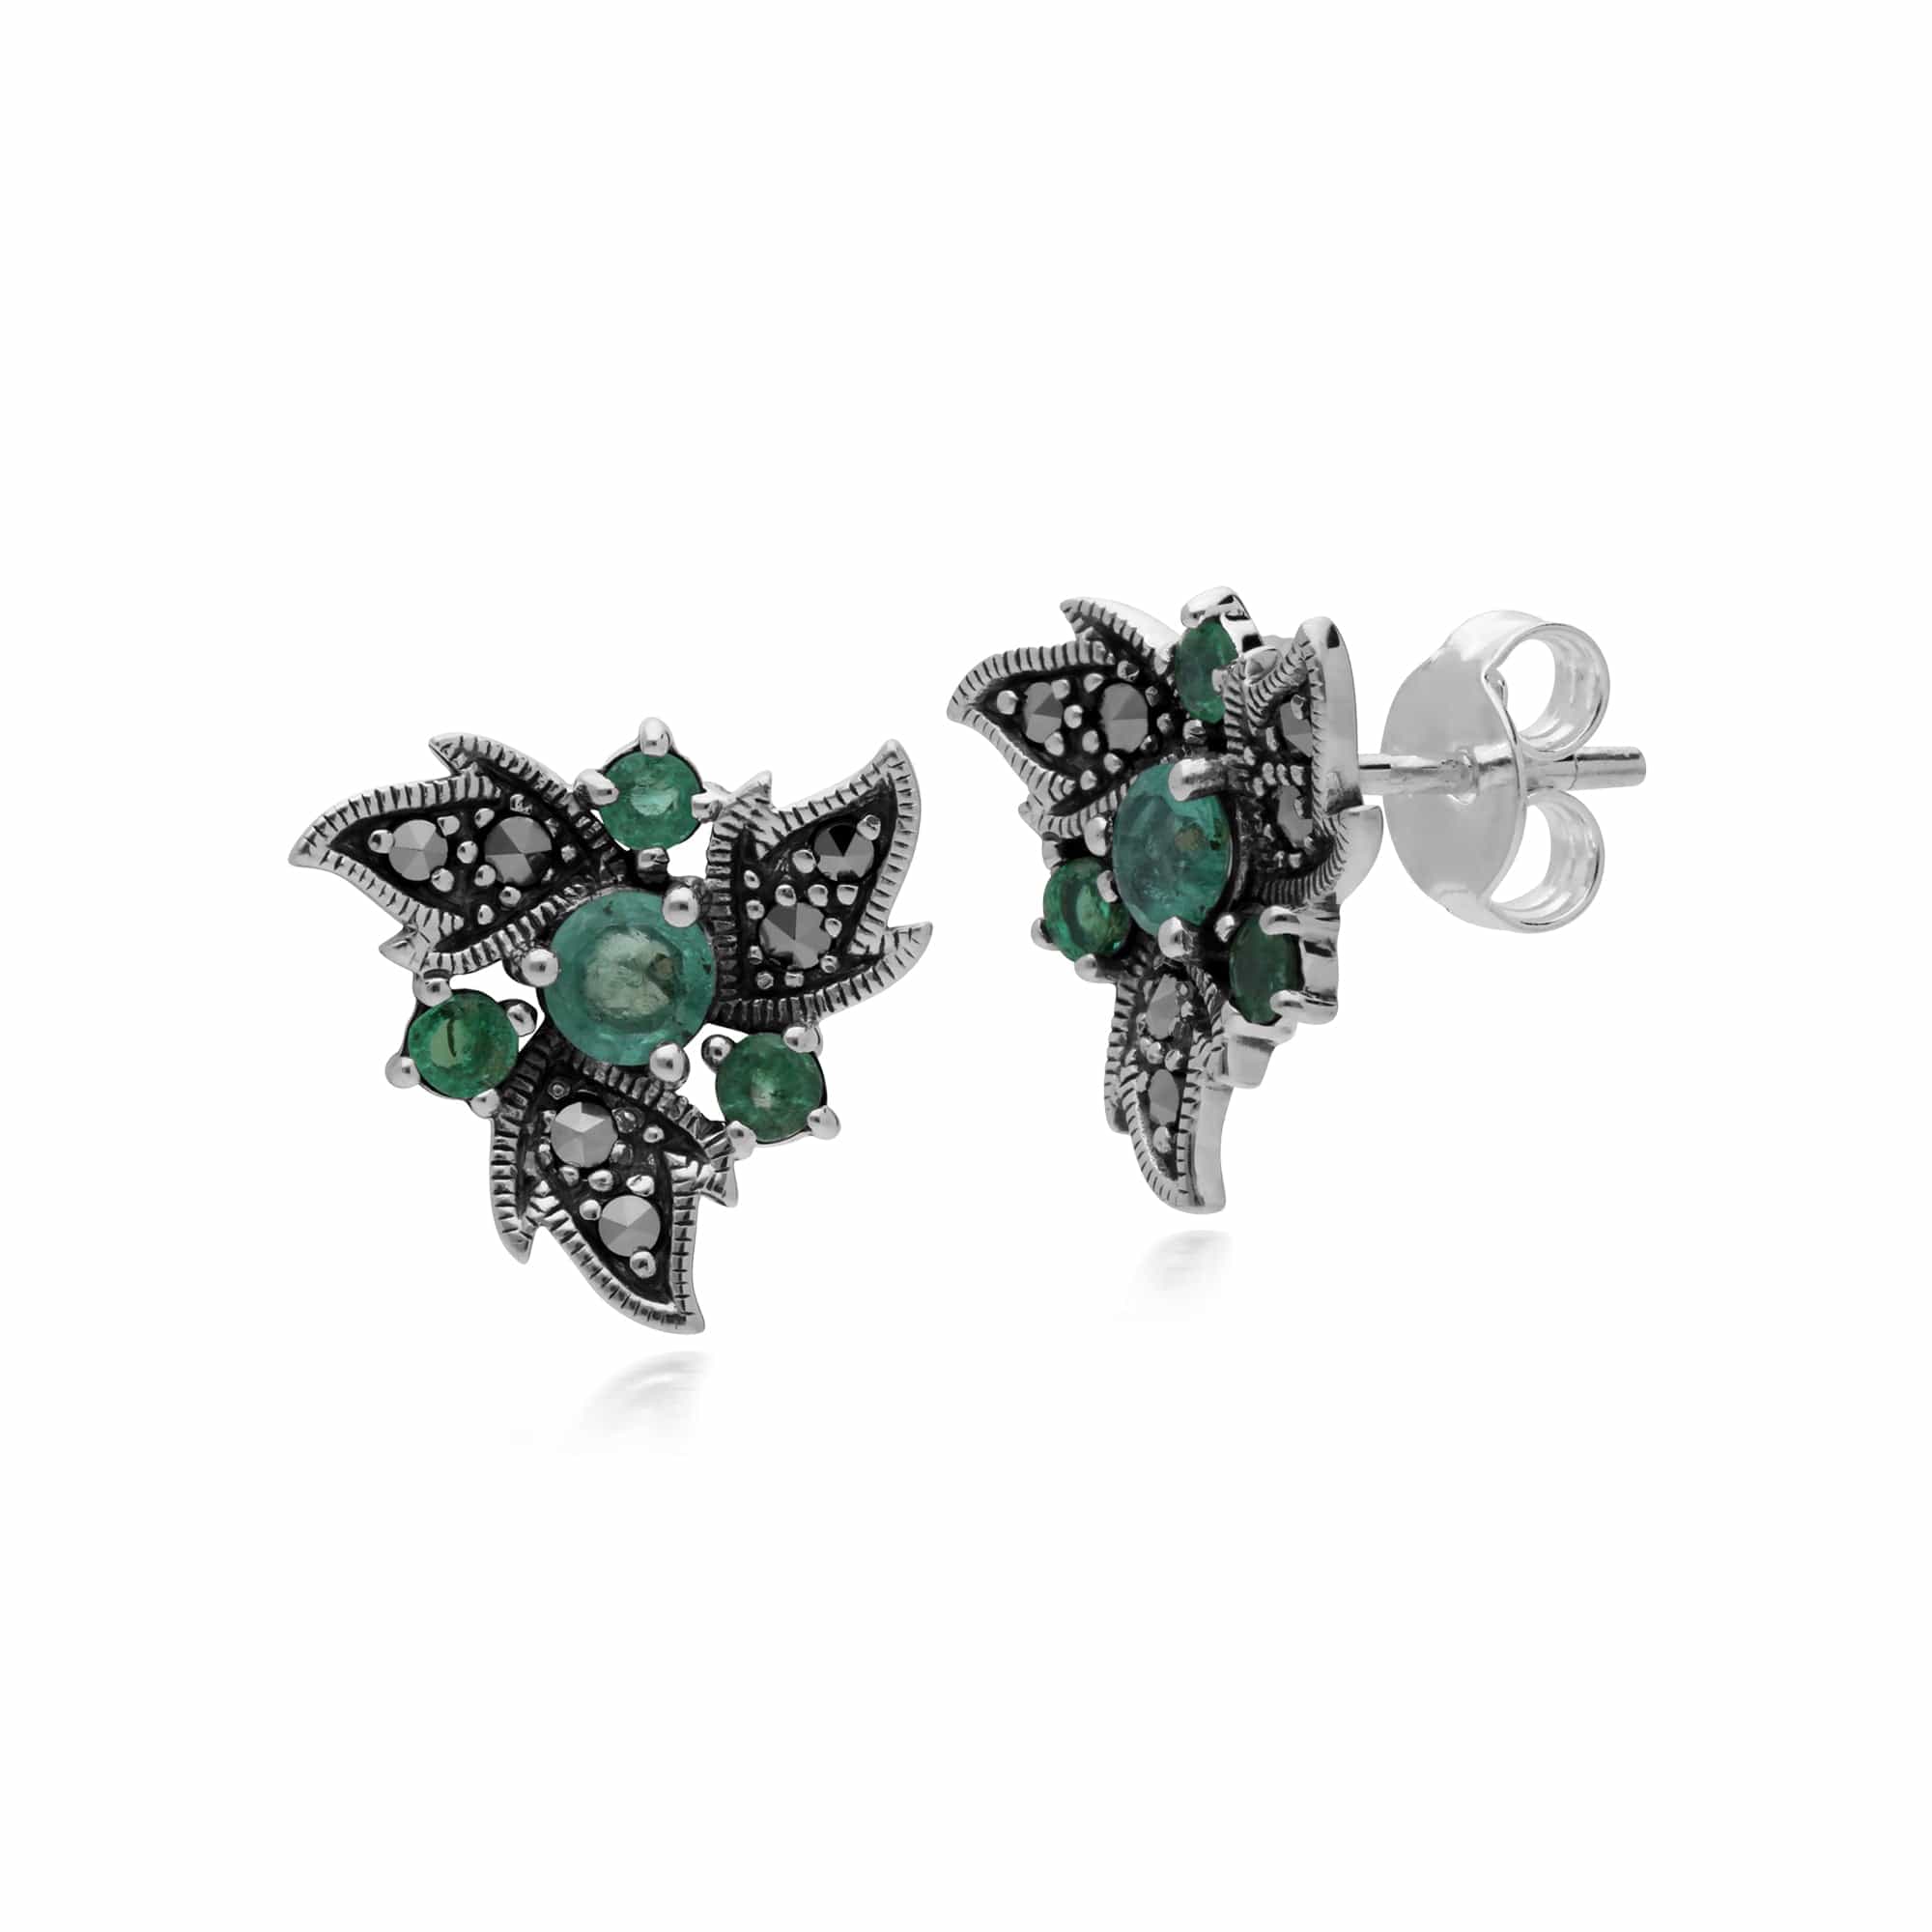 214E860407925 Art Nouveau Style Round Emerald & Marcasite Floral Stud Earrings in Sterling Silver 1